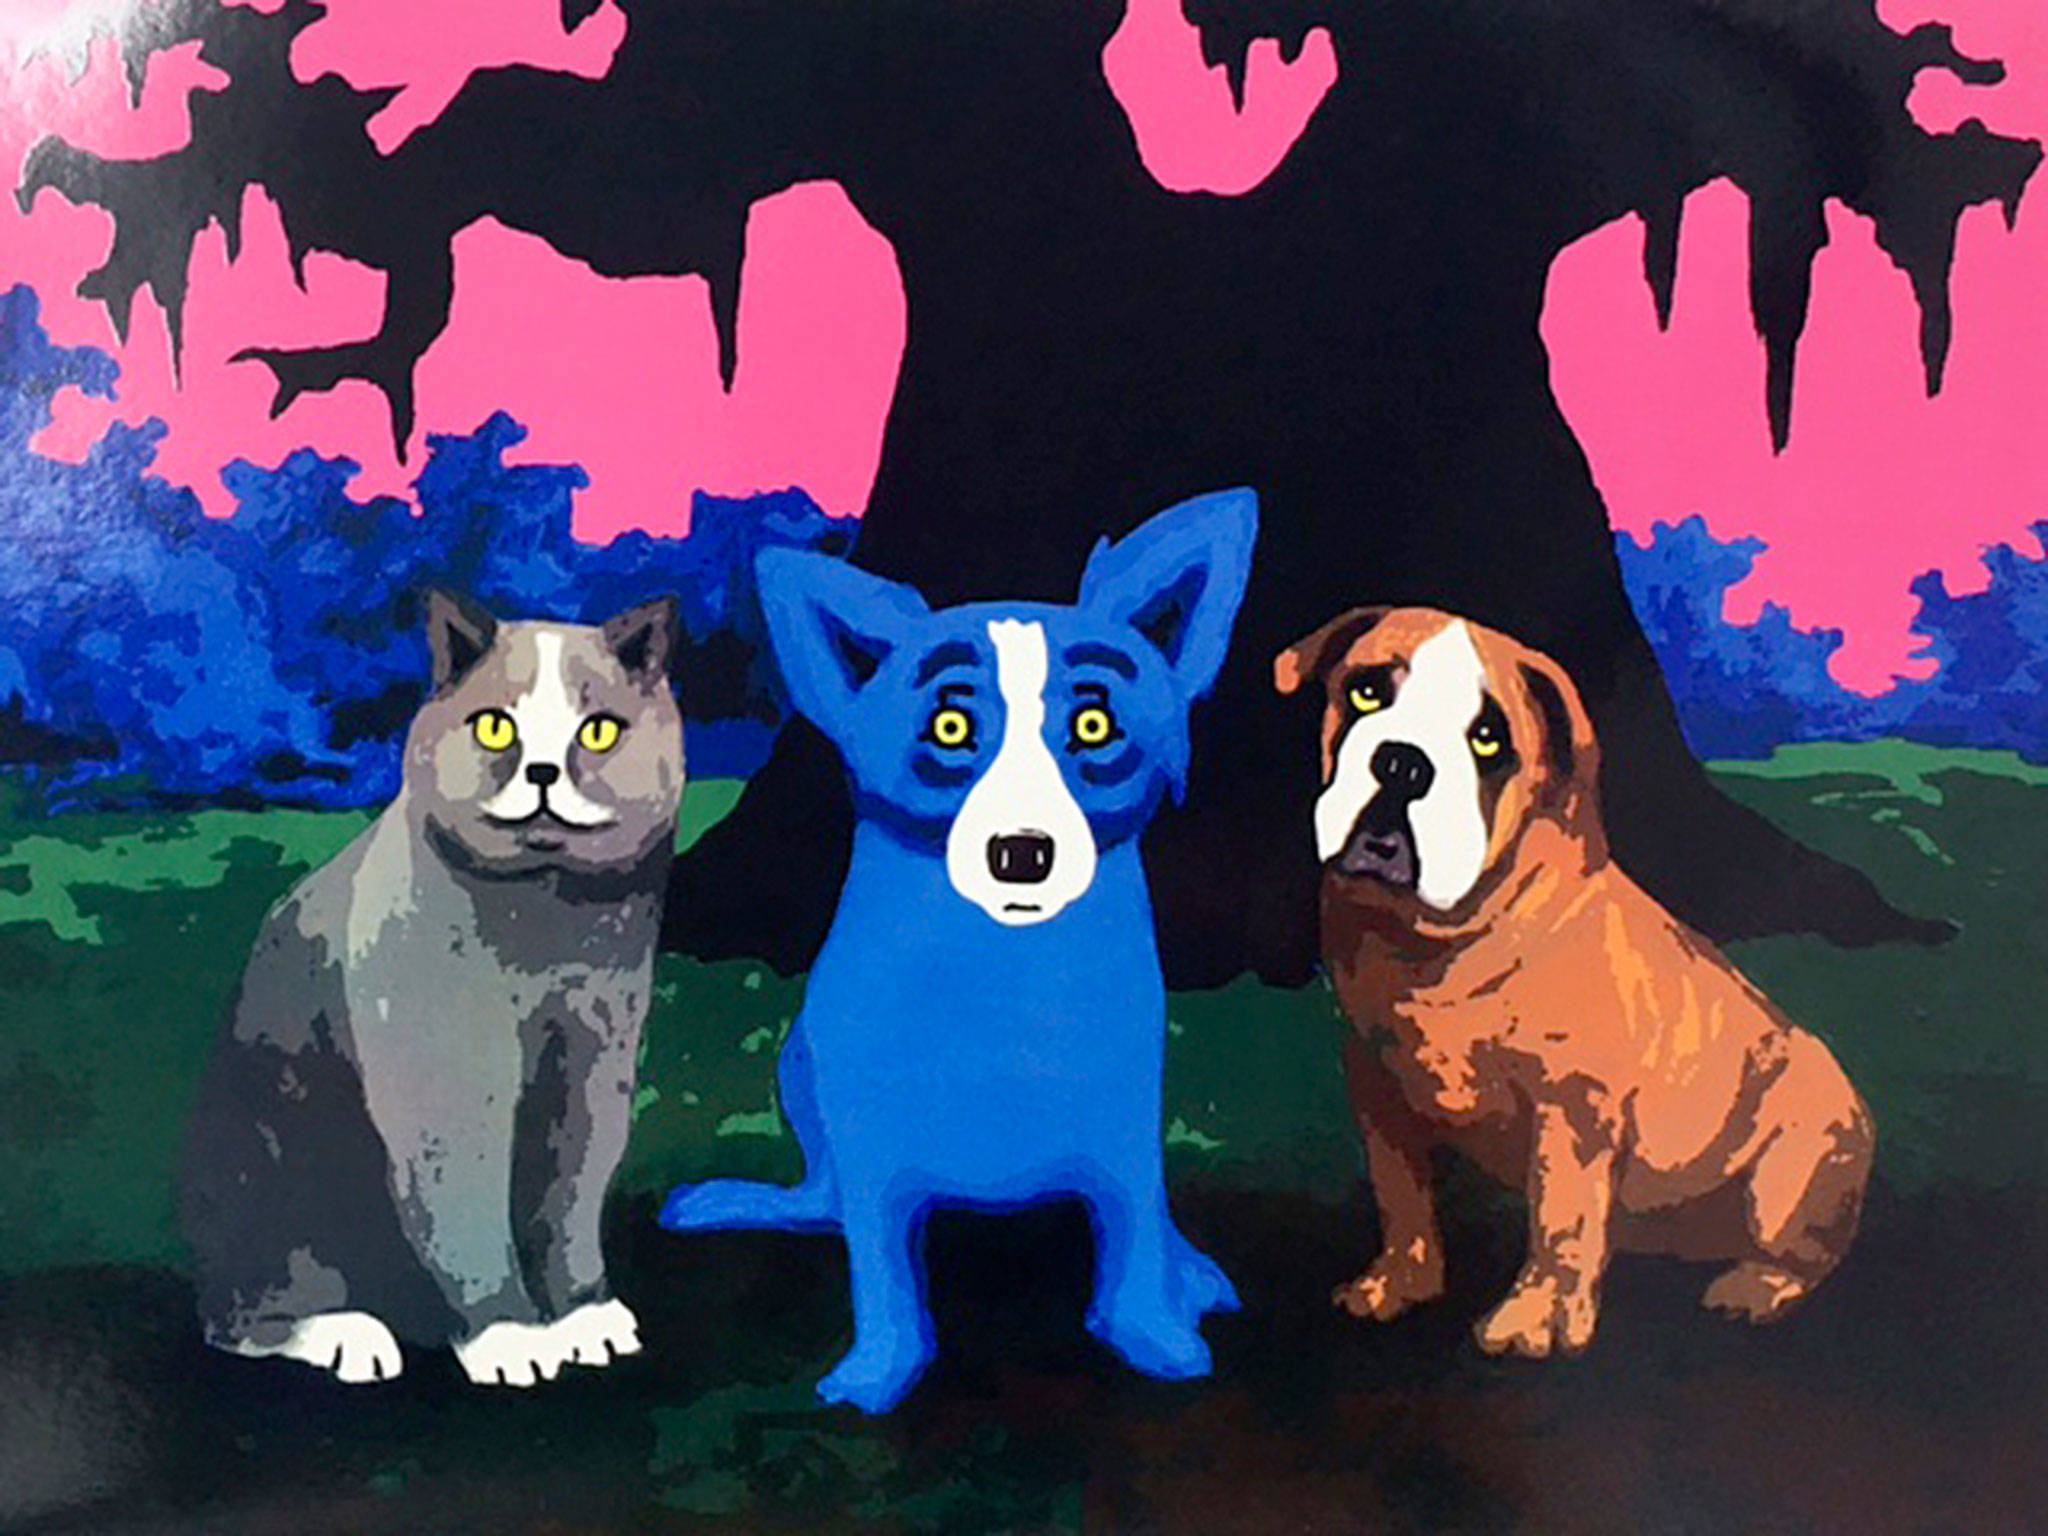 “Three Amigos” by George Rodrigue will be auctioned off during the Olympic Peninsula Humane Society’s annual dinner and auction, Meowgaritas and Mutts, on Saturday at the Vern Burton Community Center in Port Angeles.